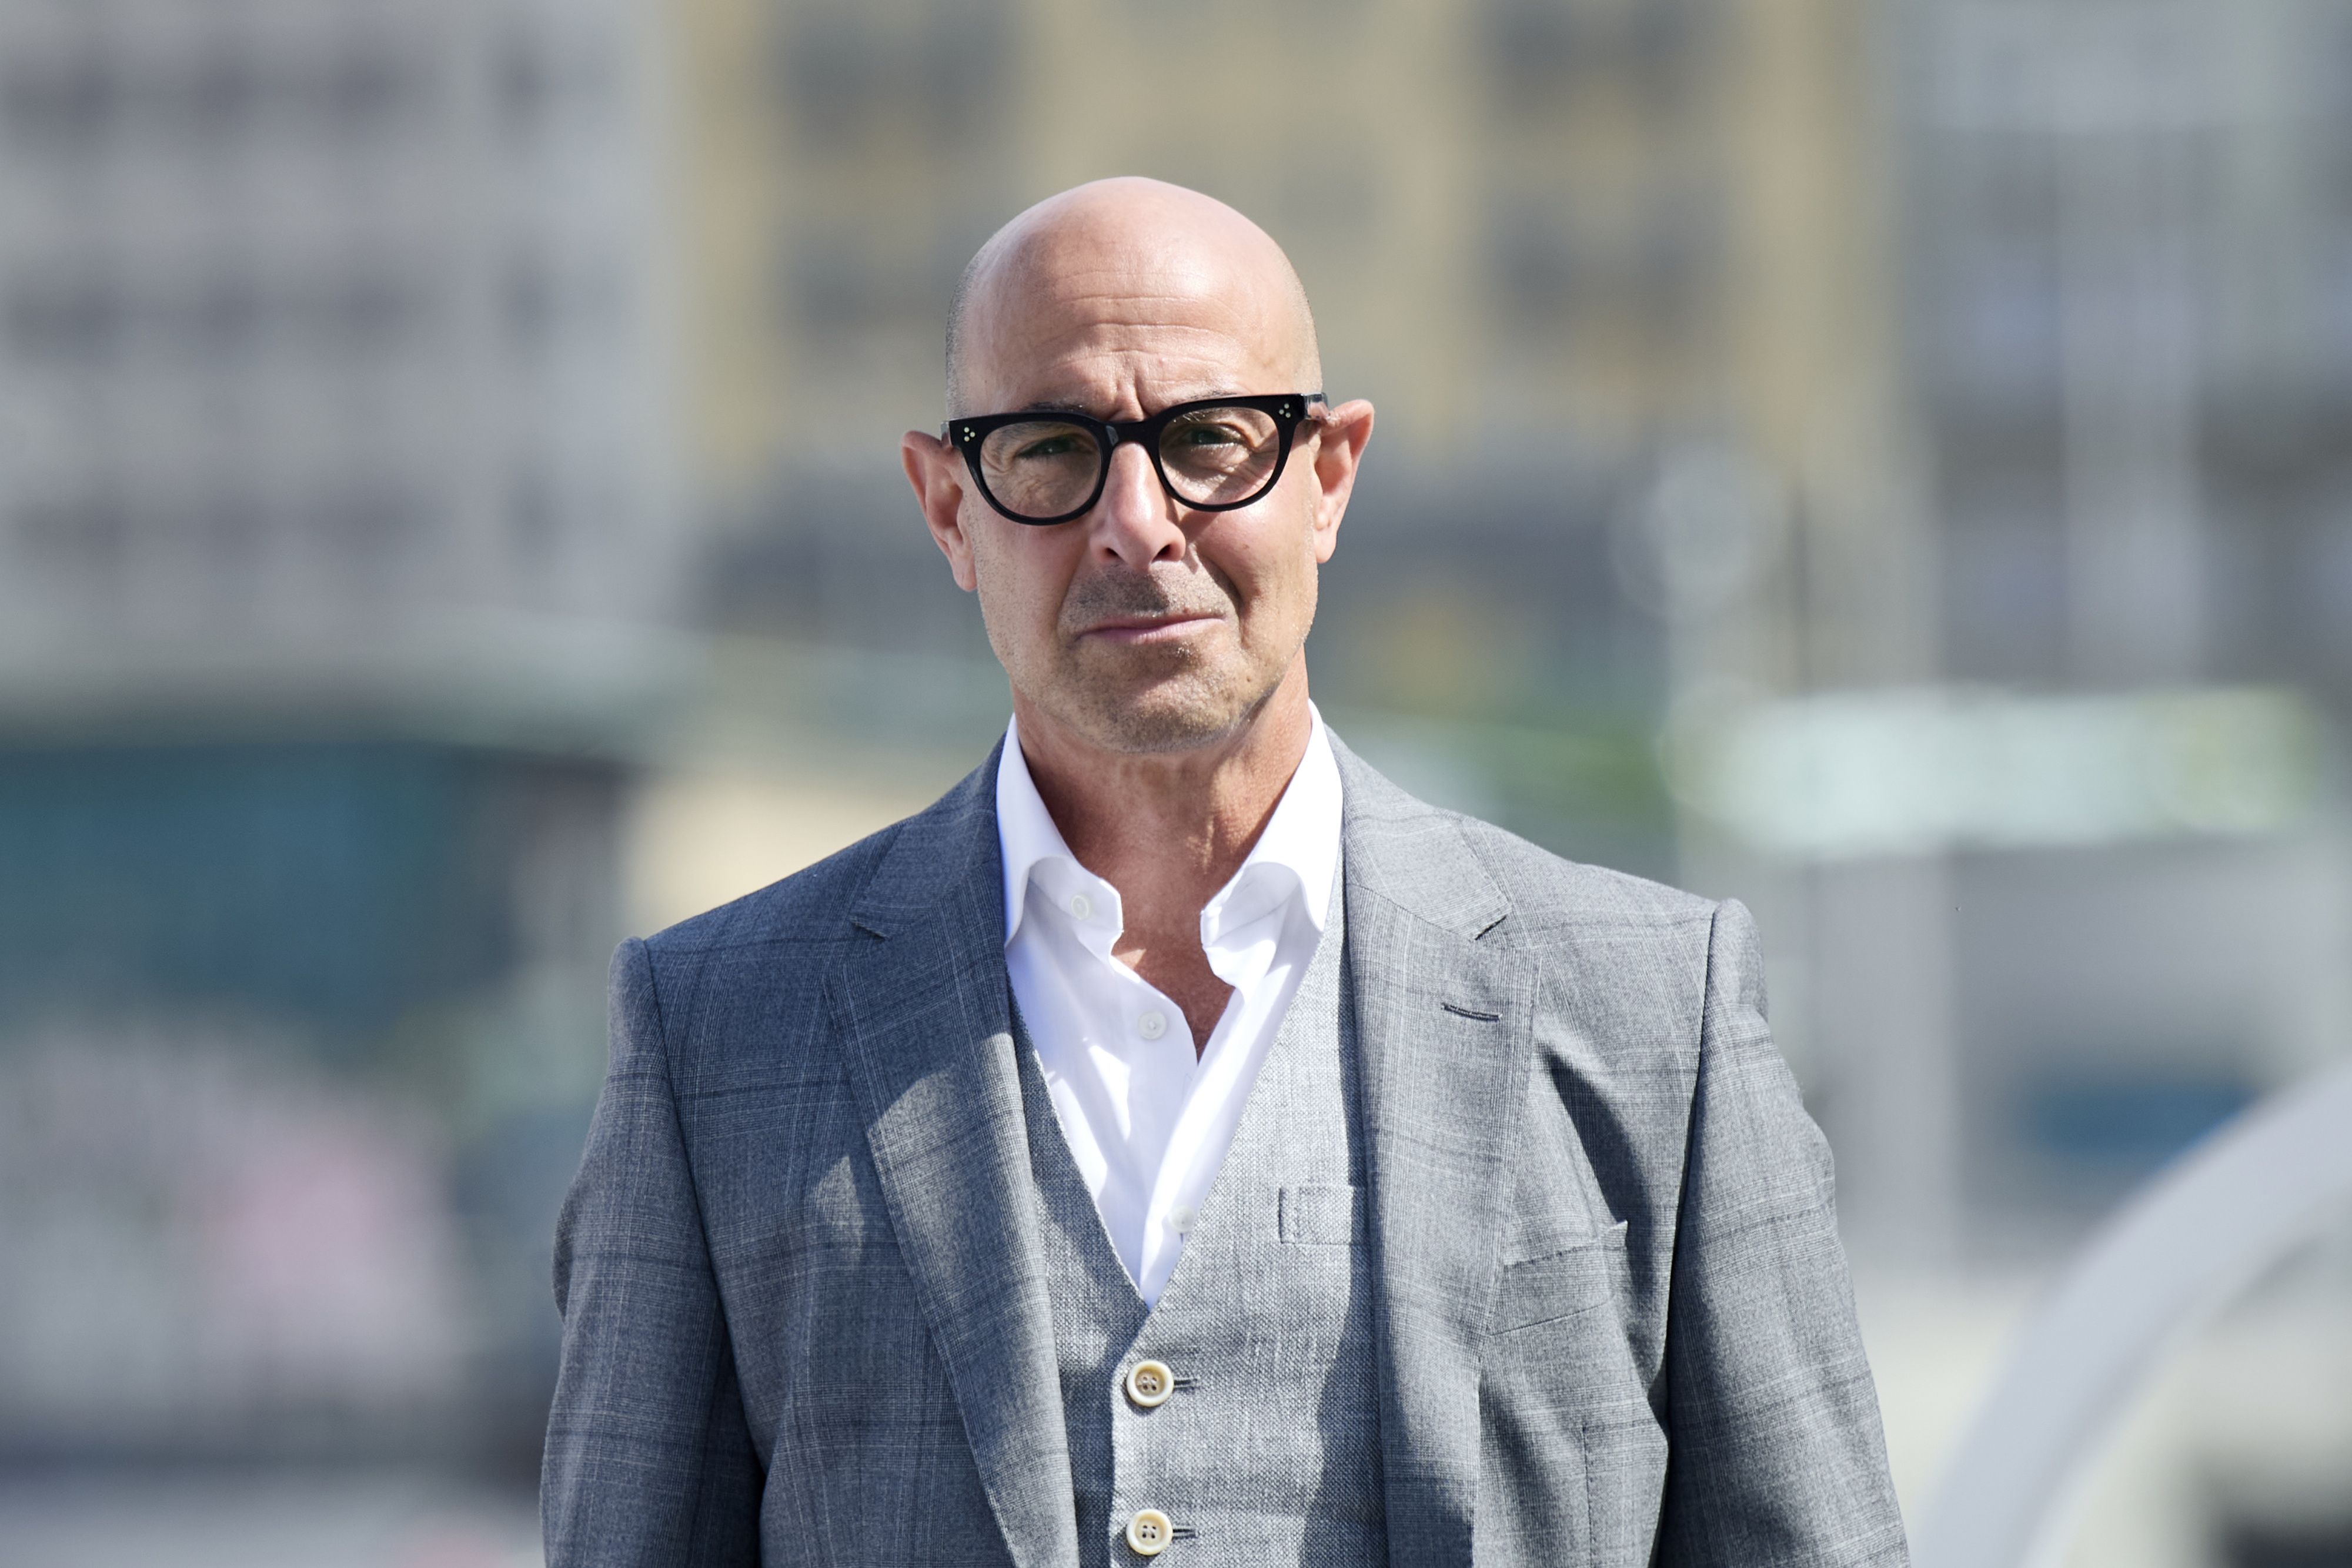 The One Piece from Stanley Tucci's New Cookware Line You Should